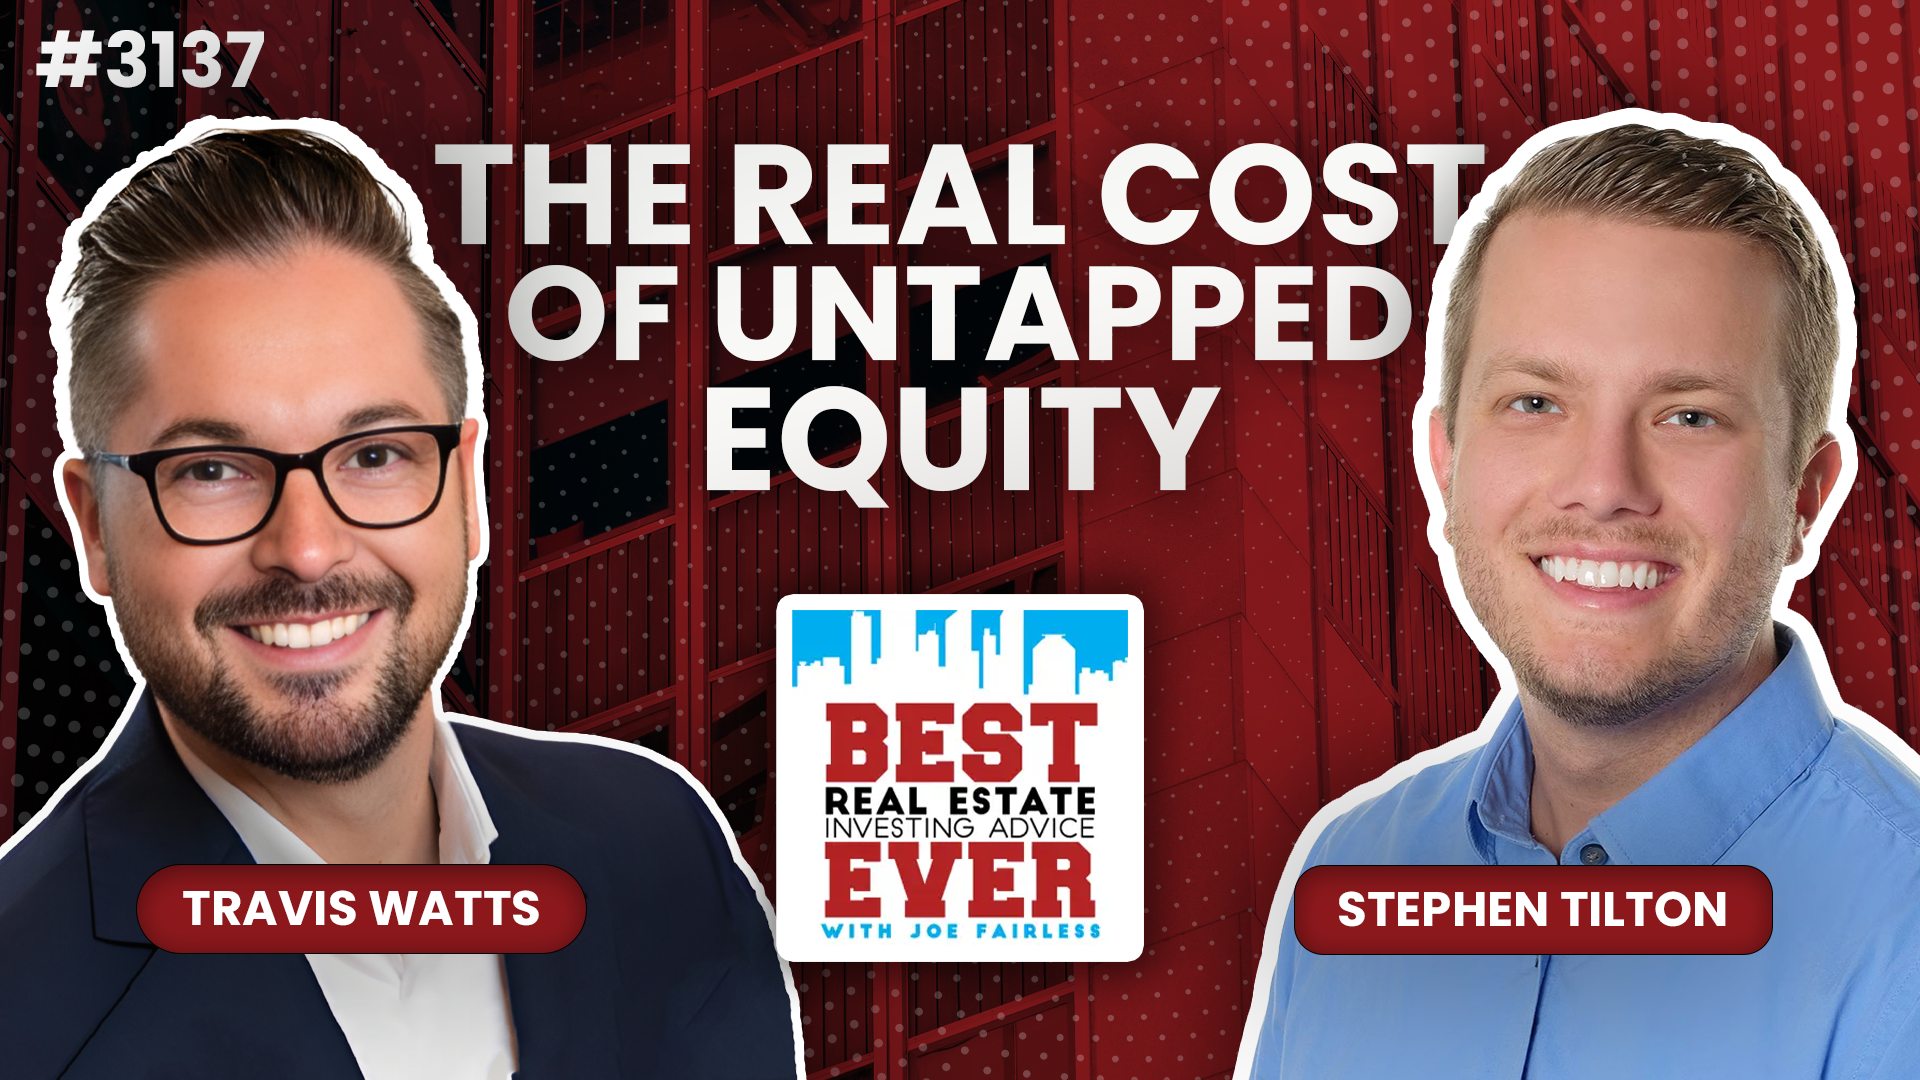 JF3137: The Real Cost of Untapped Equity ft. Stephen Tilton